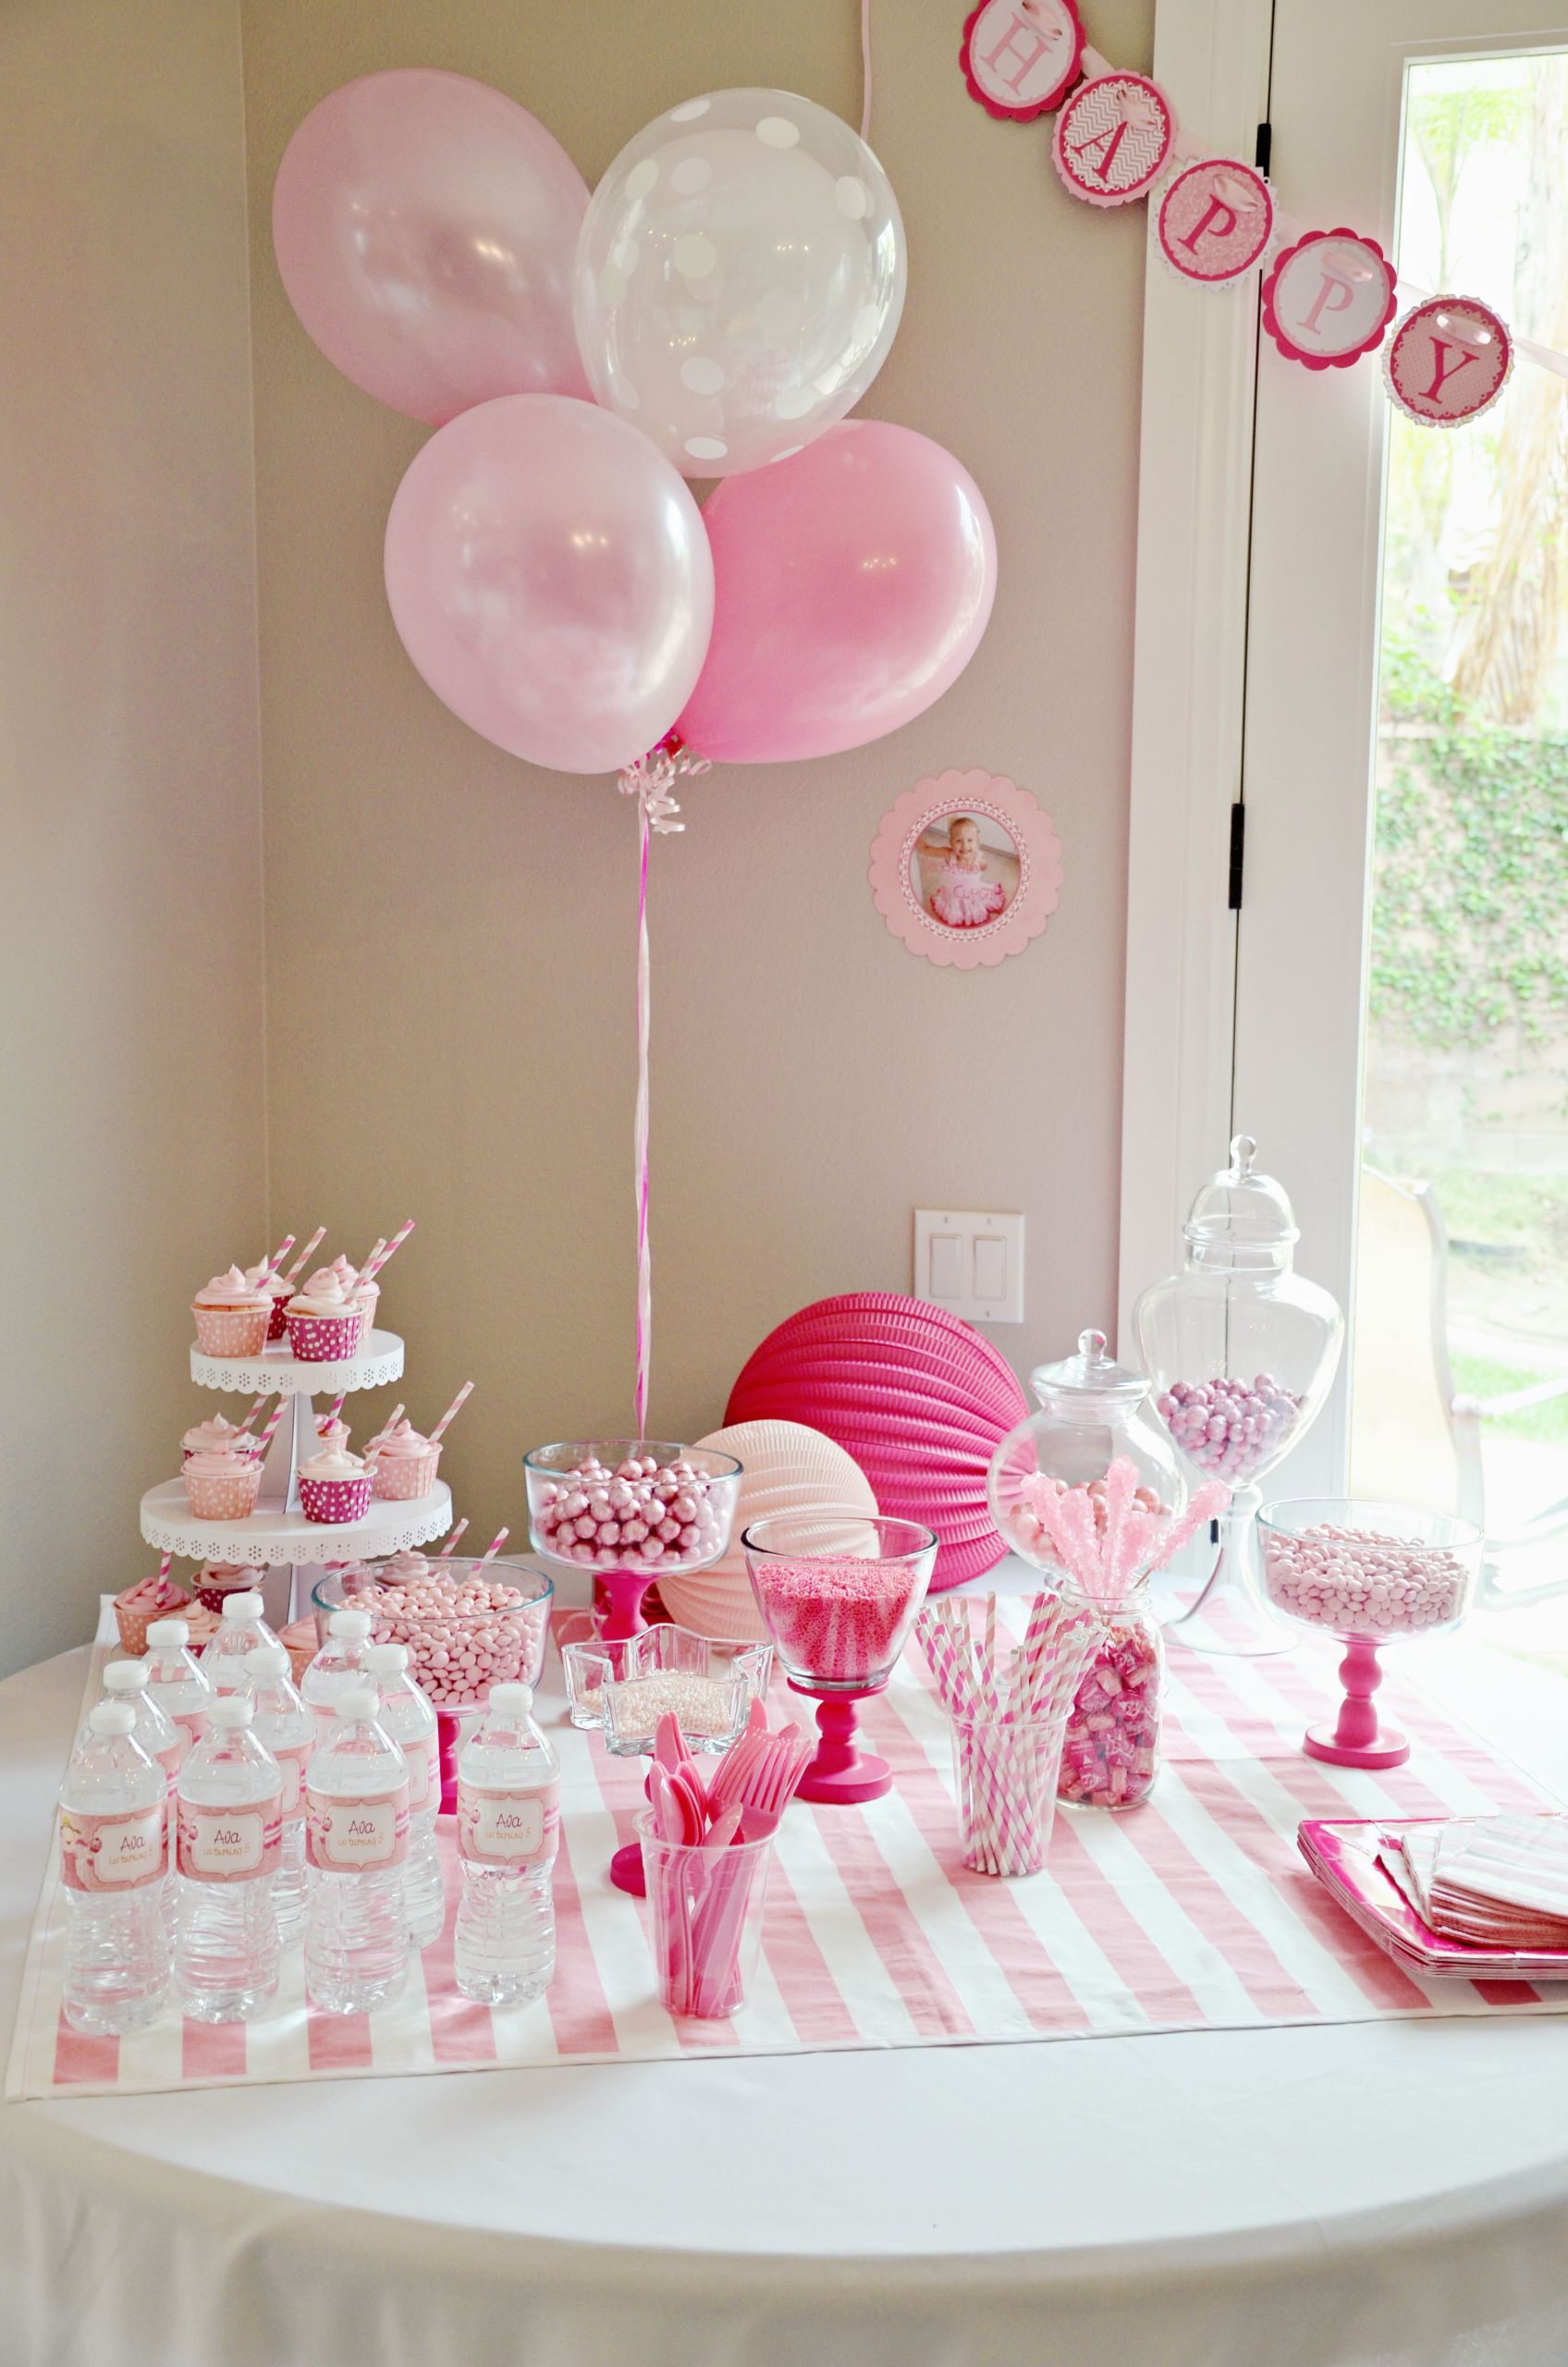 Three Year Old Birthday Party Ideas
 A Pinkalicious themed party for a 3 year old